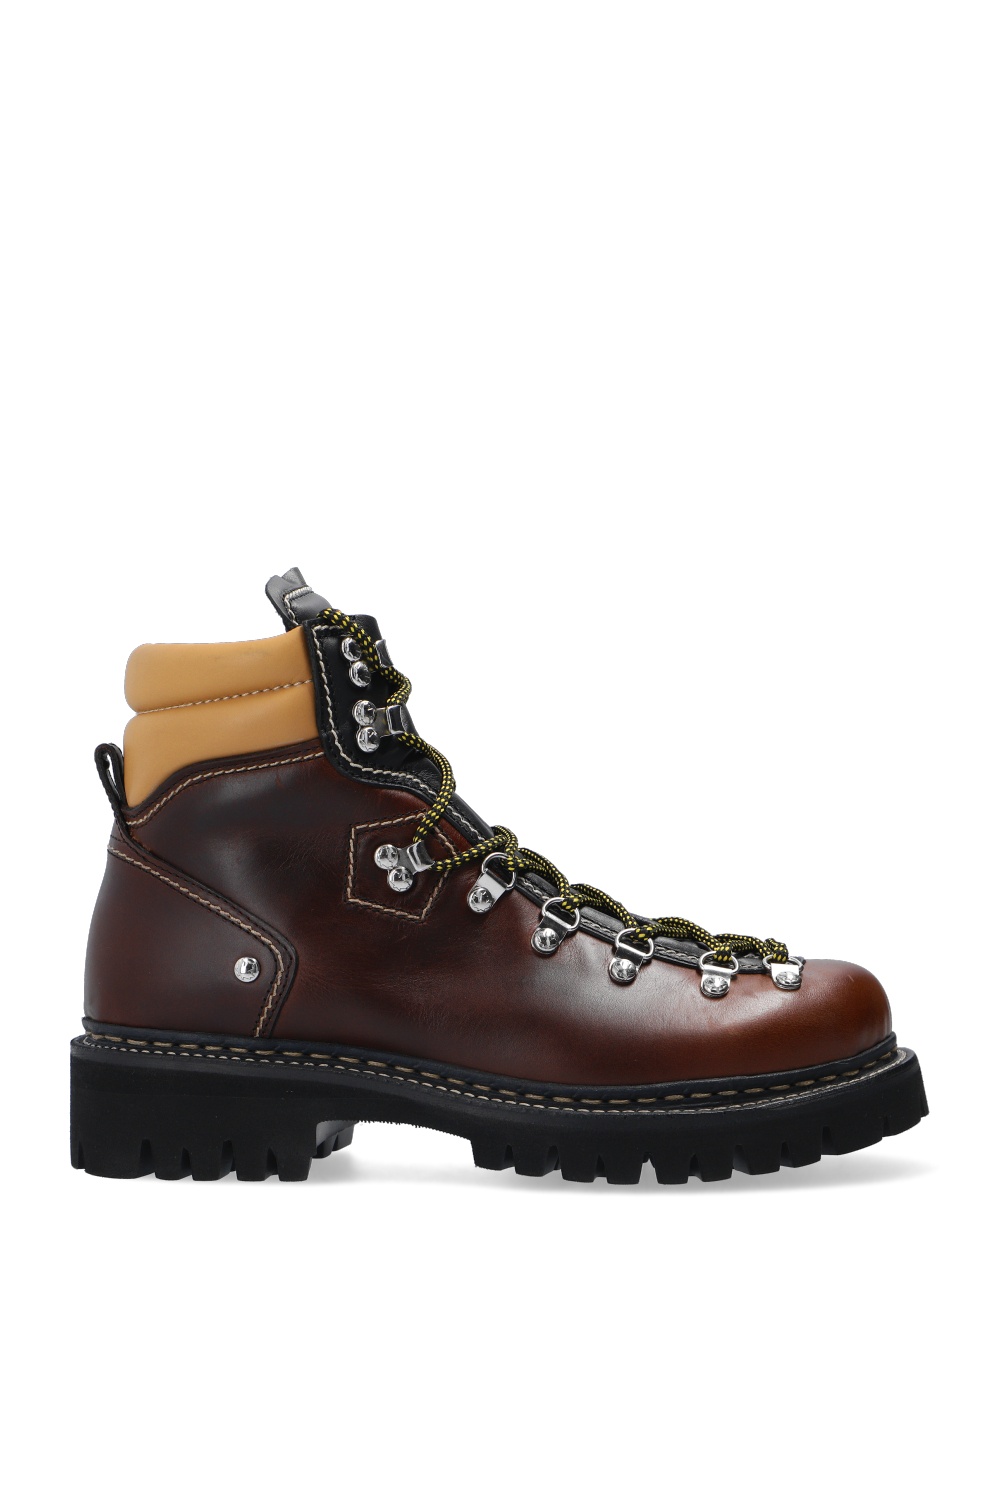 Boots with logo Dsquared2 - Vitkac 